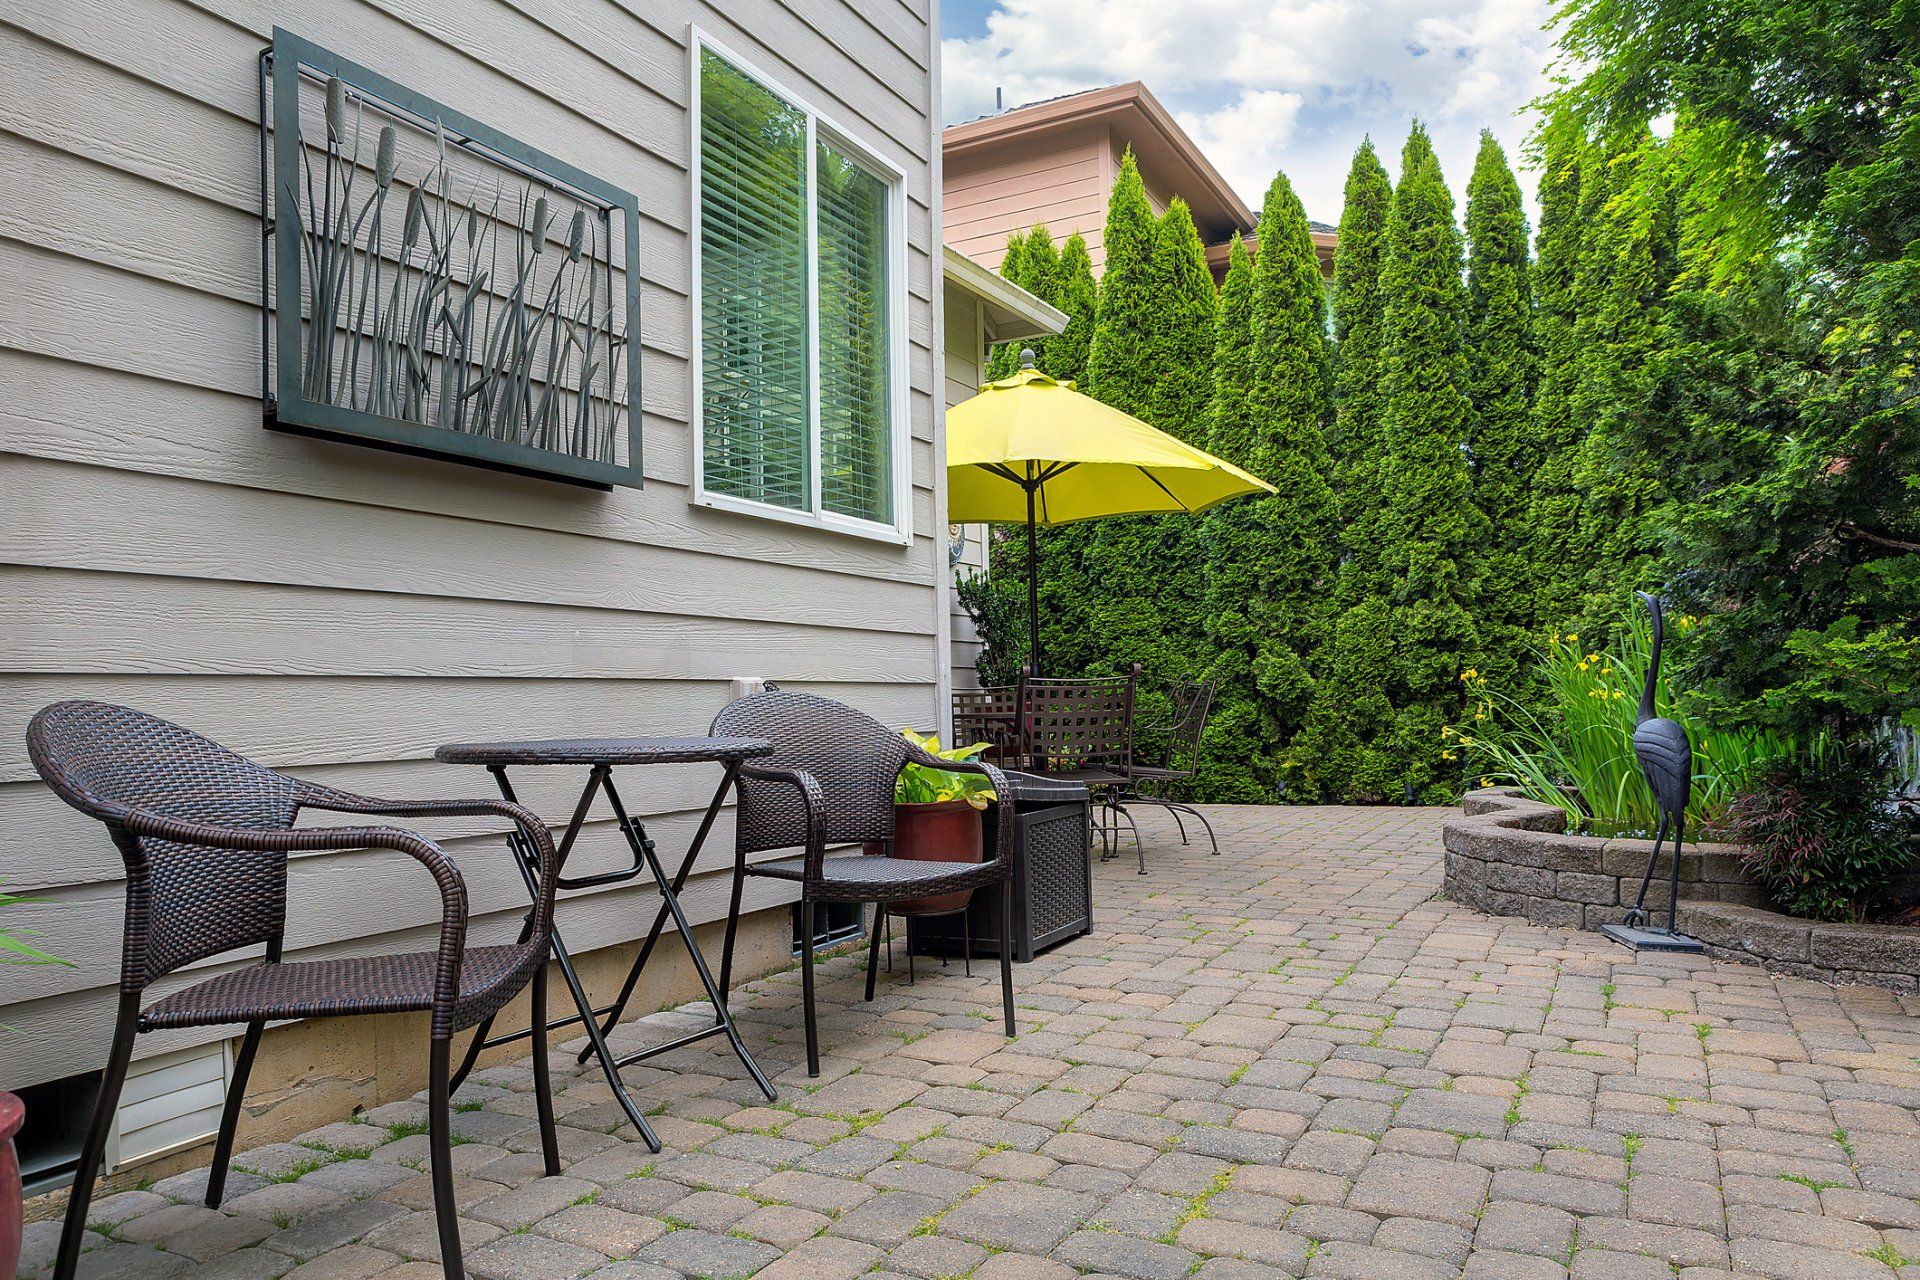 Brick Paver Patios — Bistro Chairs and Table on Stone Paver Bricks Patio in Garden Backyard With Pond in Morris Plains, NJ